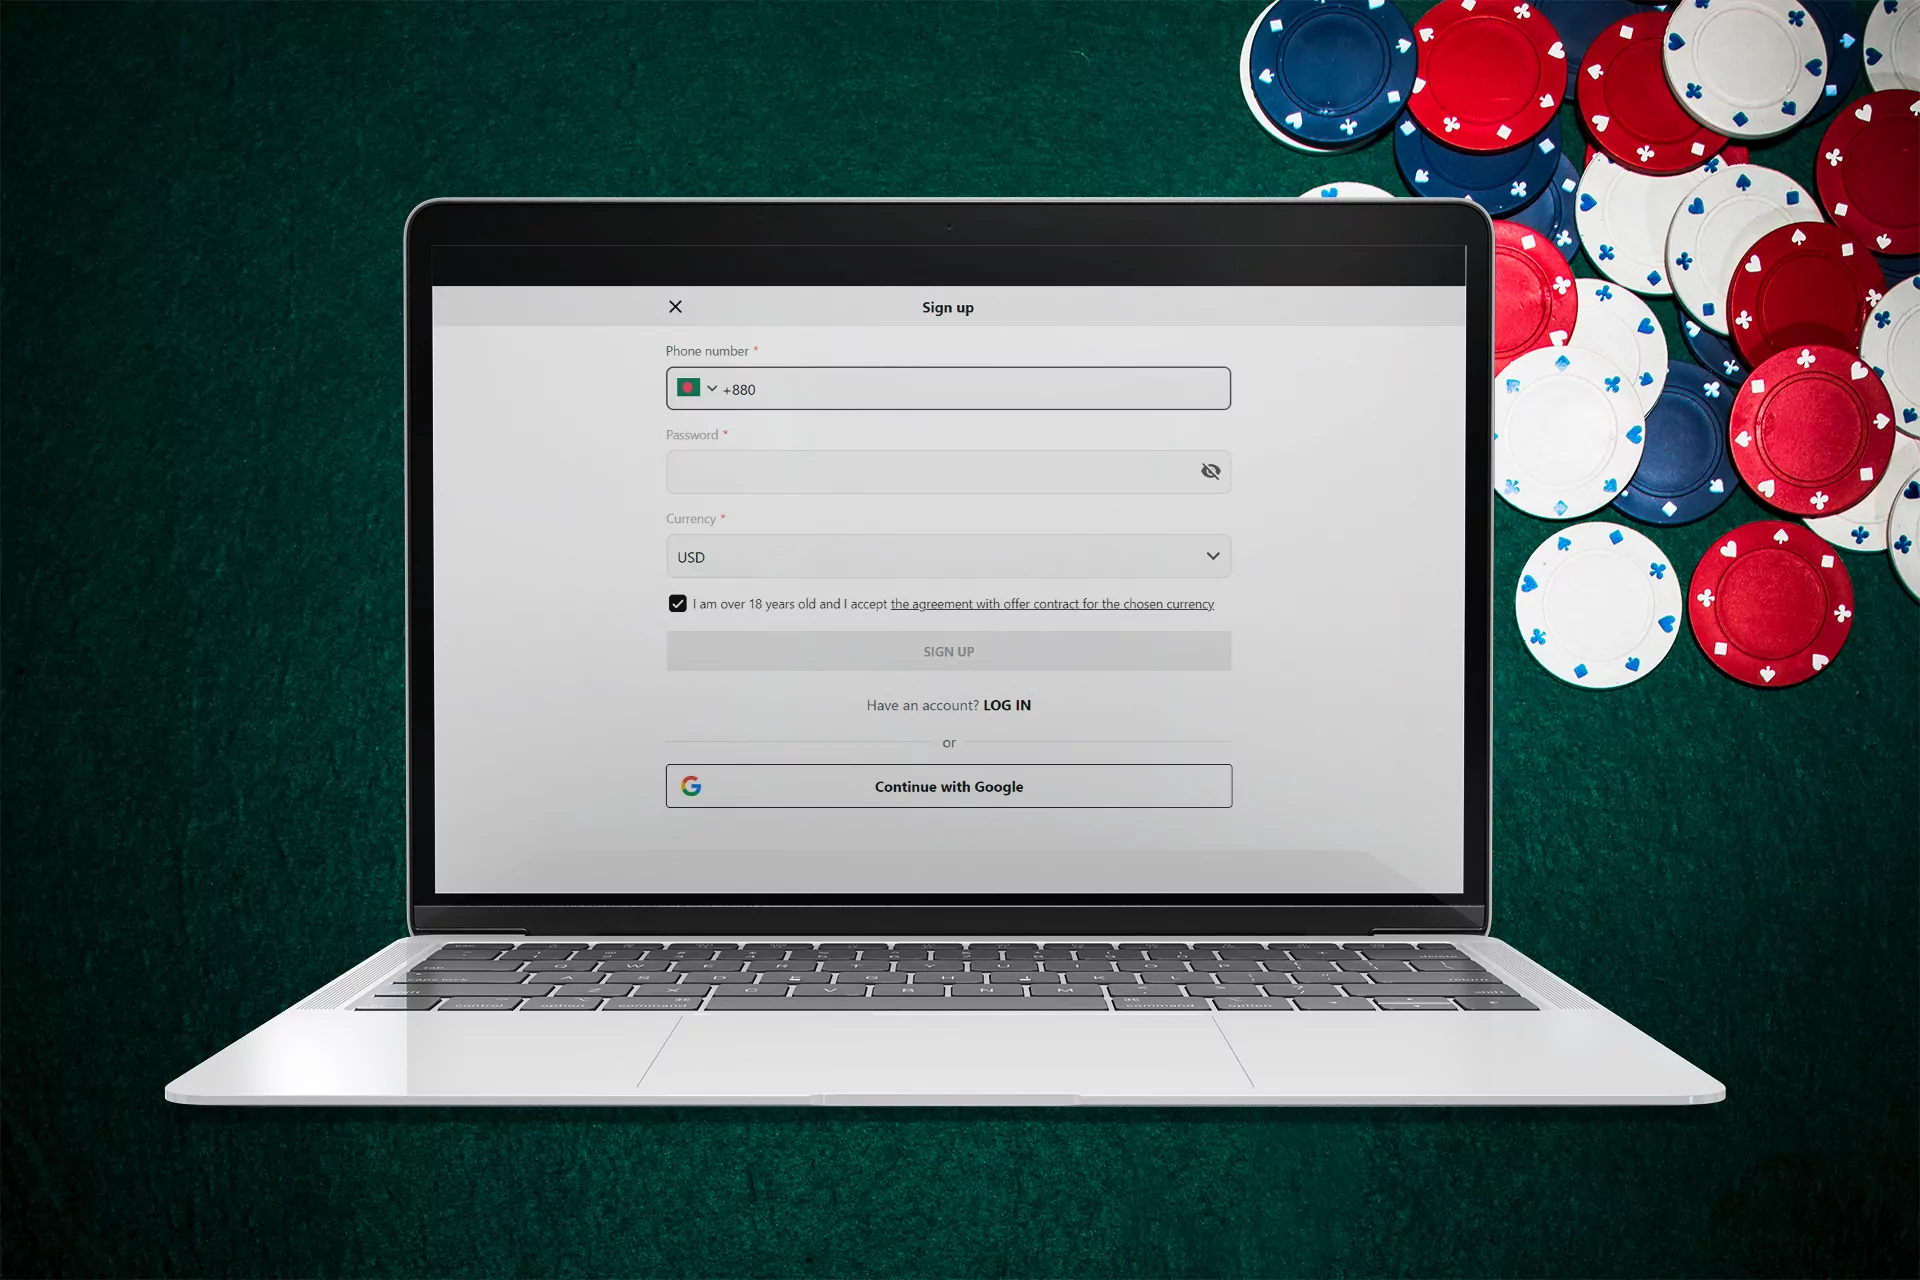 Find the best online casino and sign up for it.